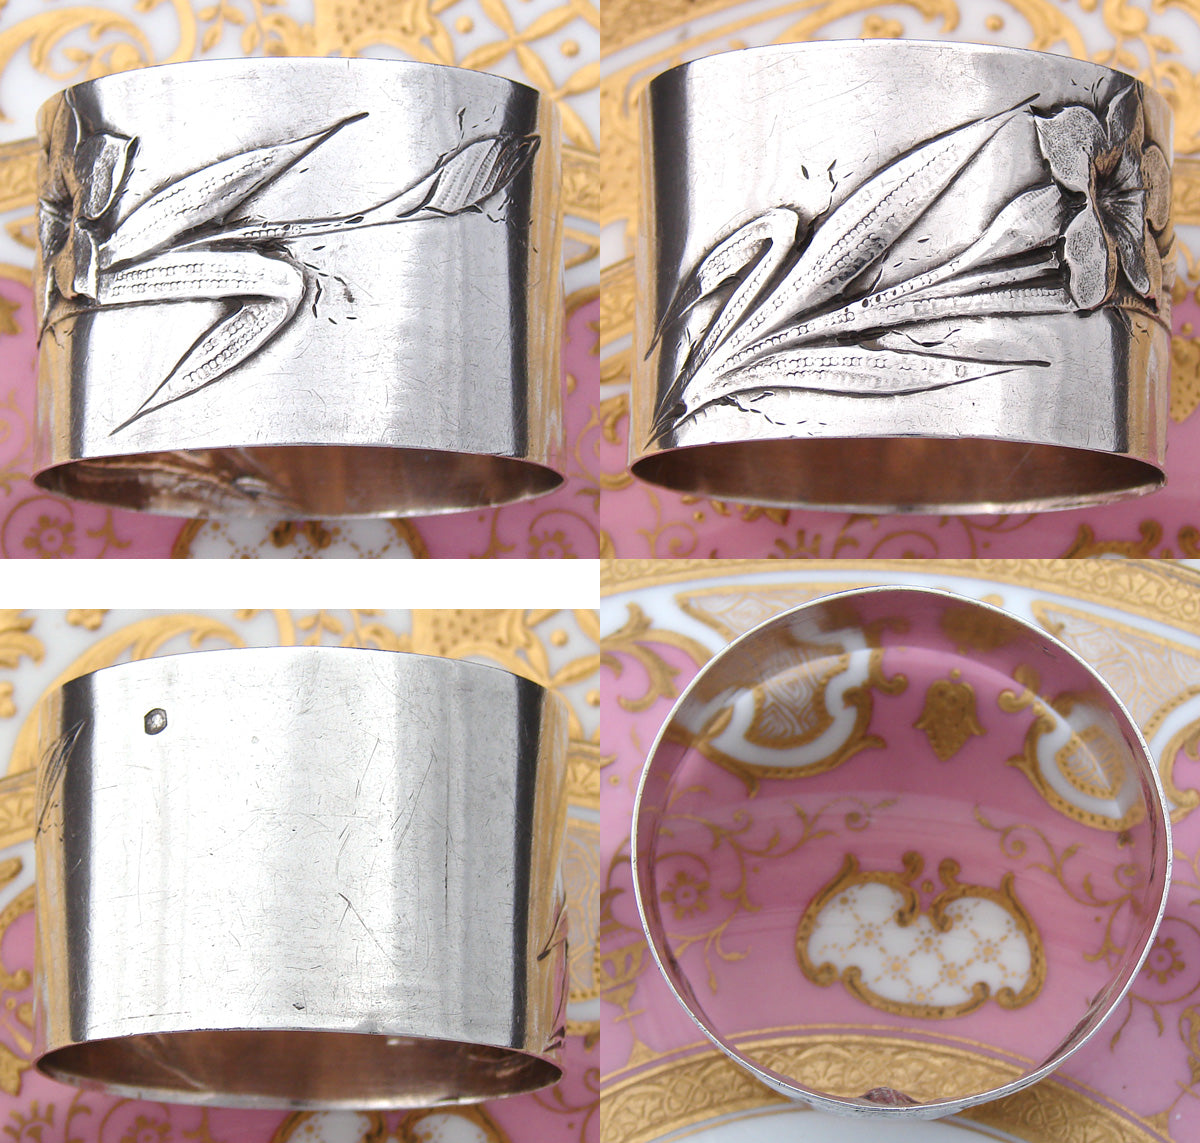 Lovely Antique French Art Nouveau Style Solid Silver Napkin Ring, Flower in Bas Relief